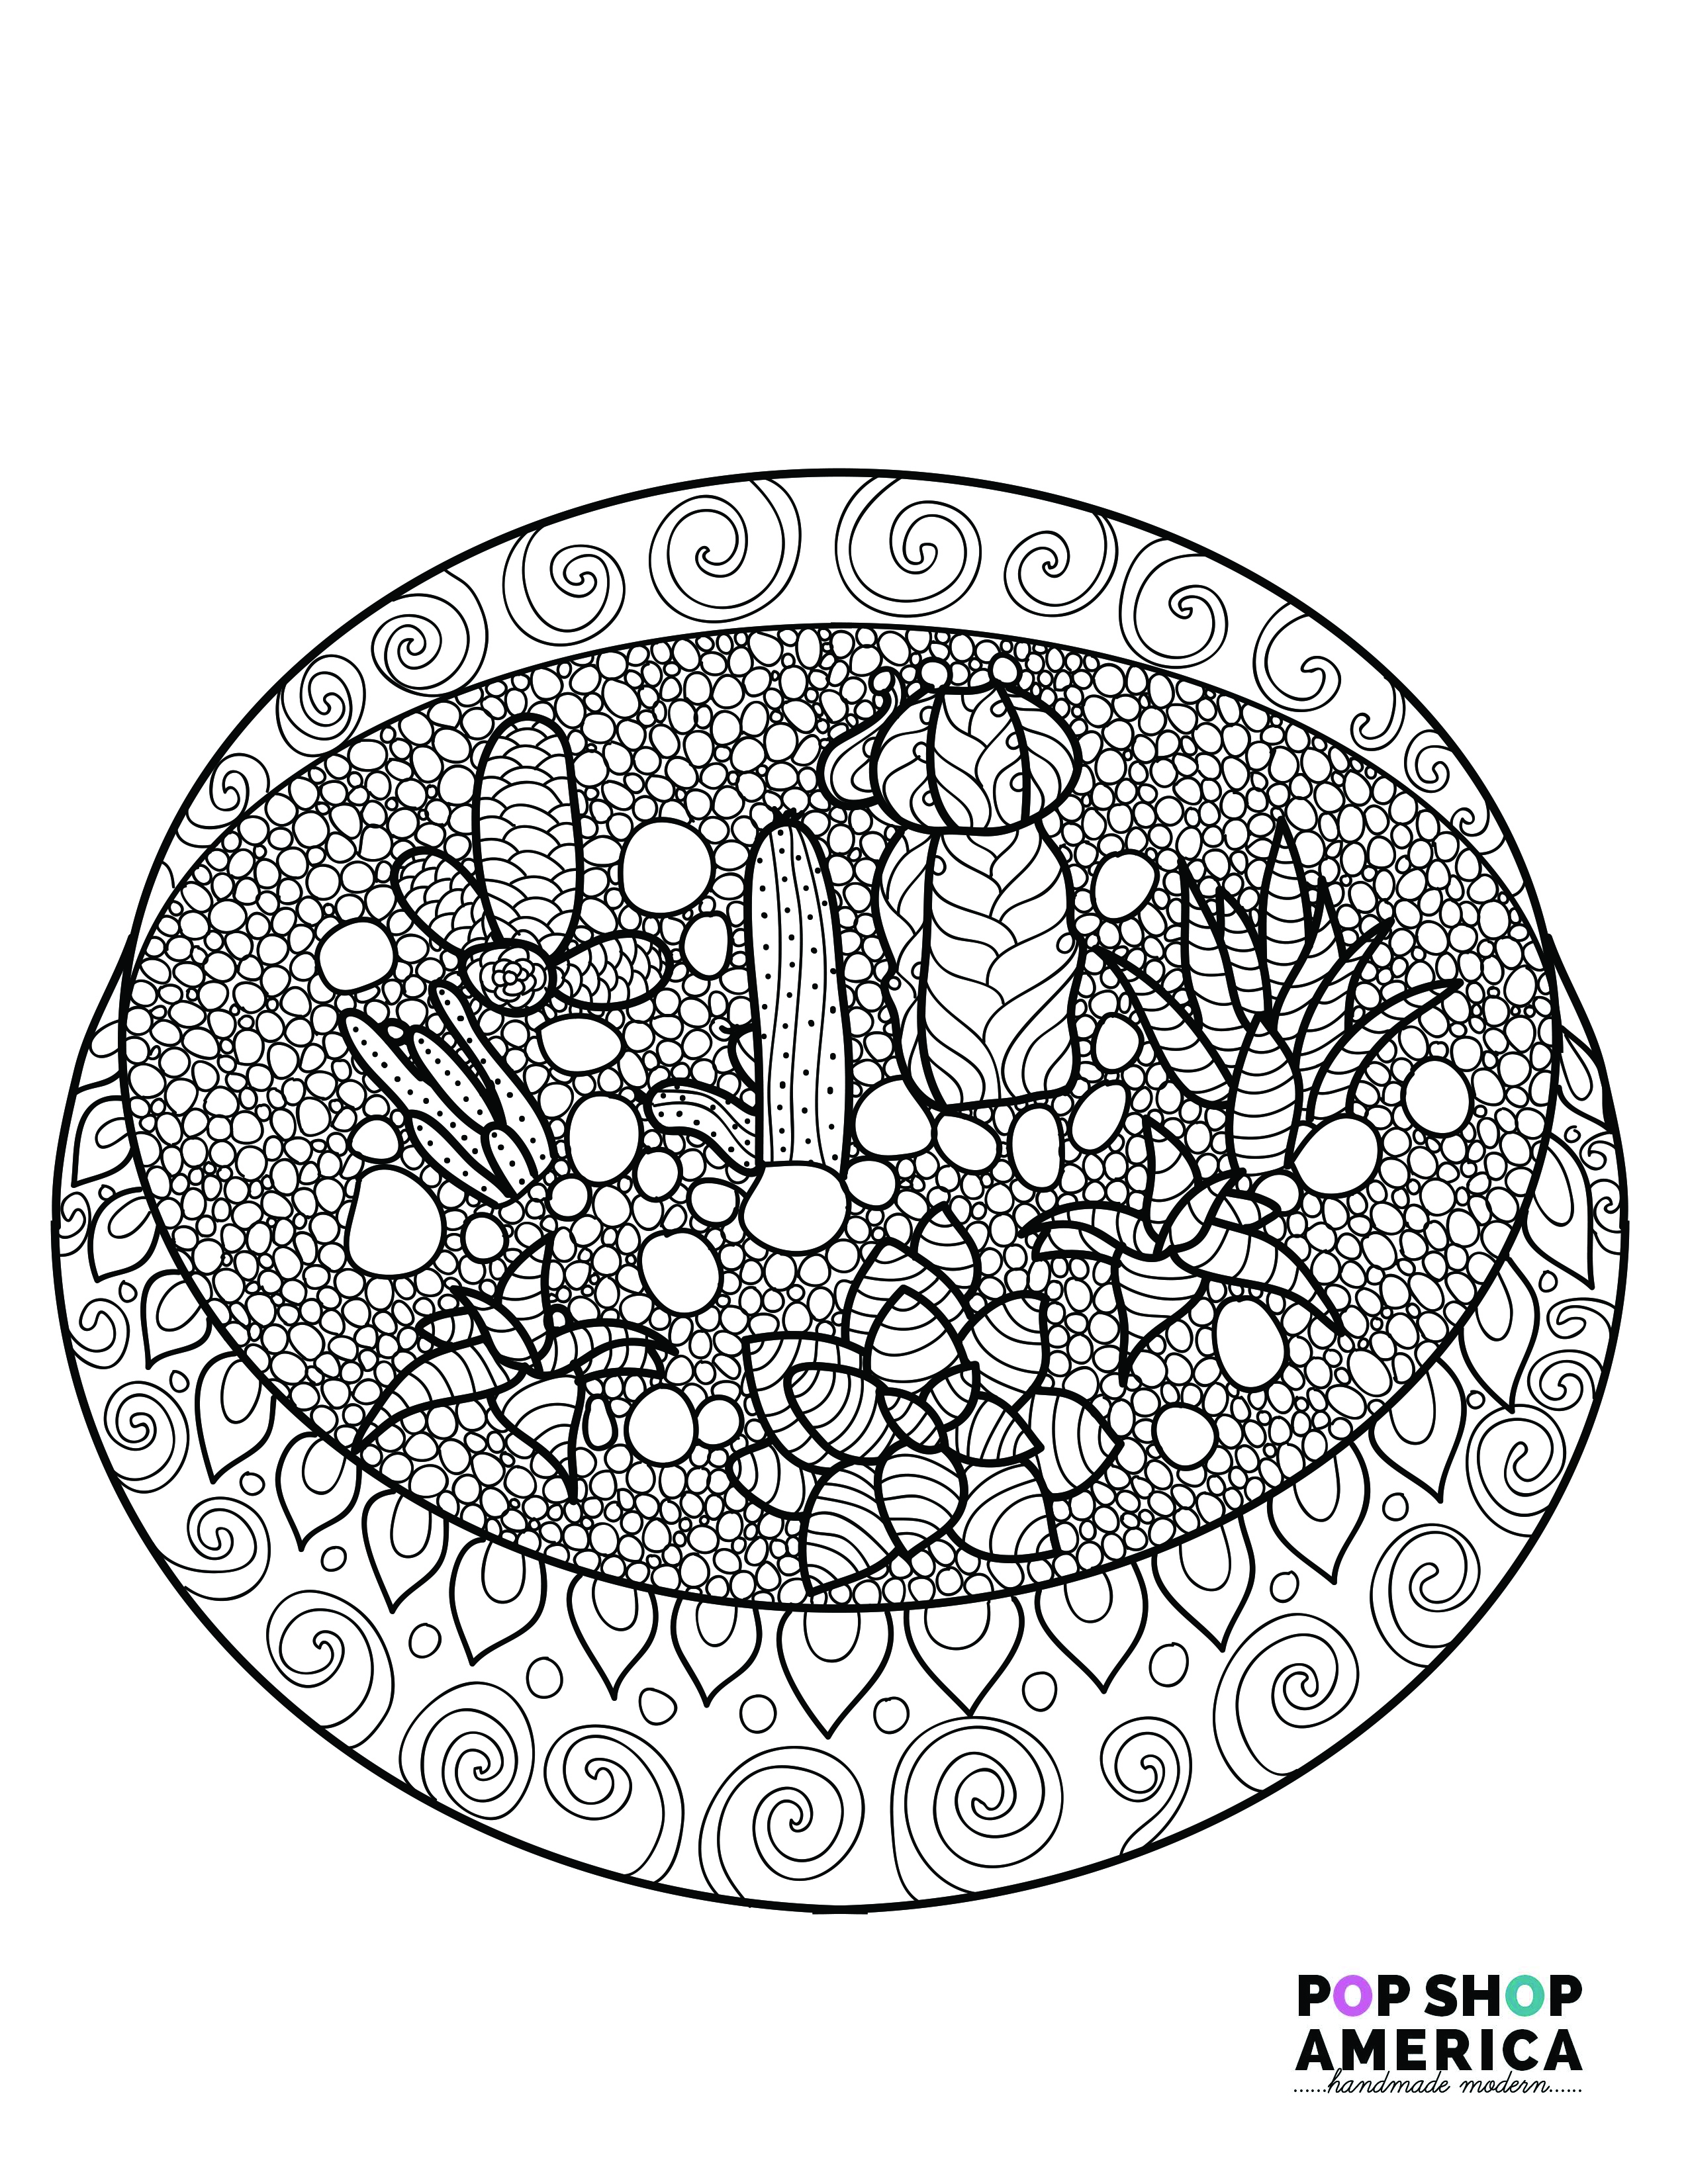 Free Adult Coloring Book Pages with Succulent Terrariums